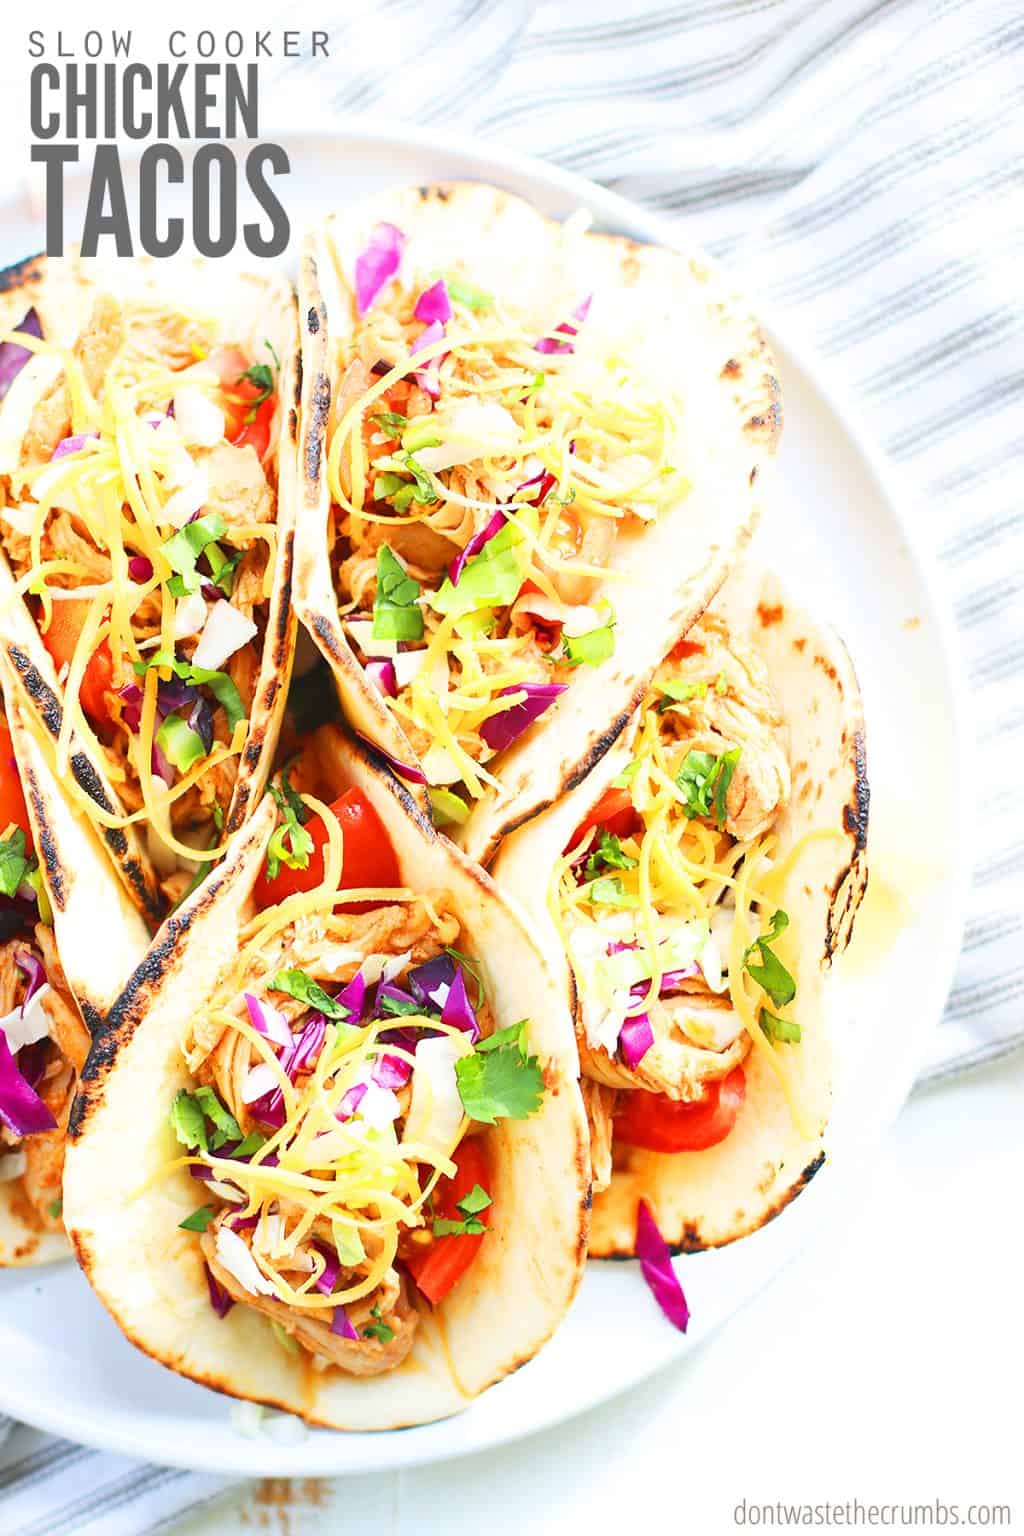 Slow Cooker Chicken Tacos - Don't Waste the Crumbs